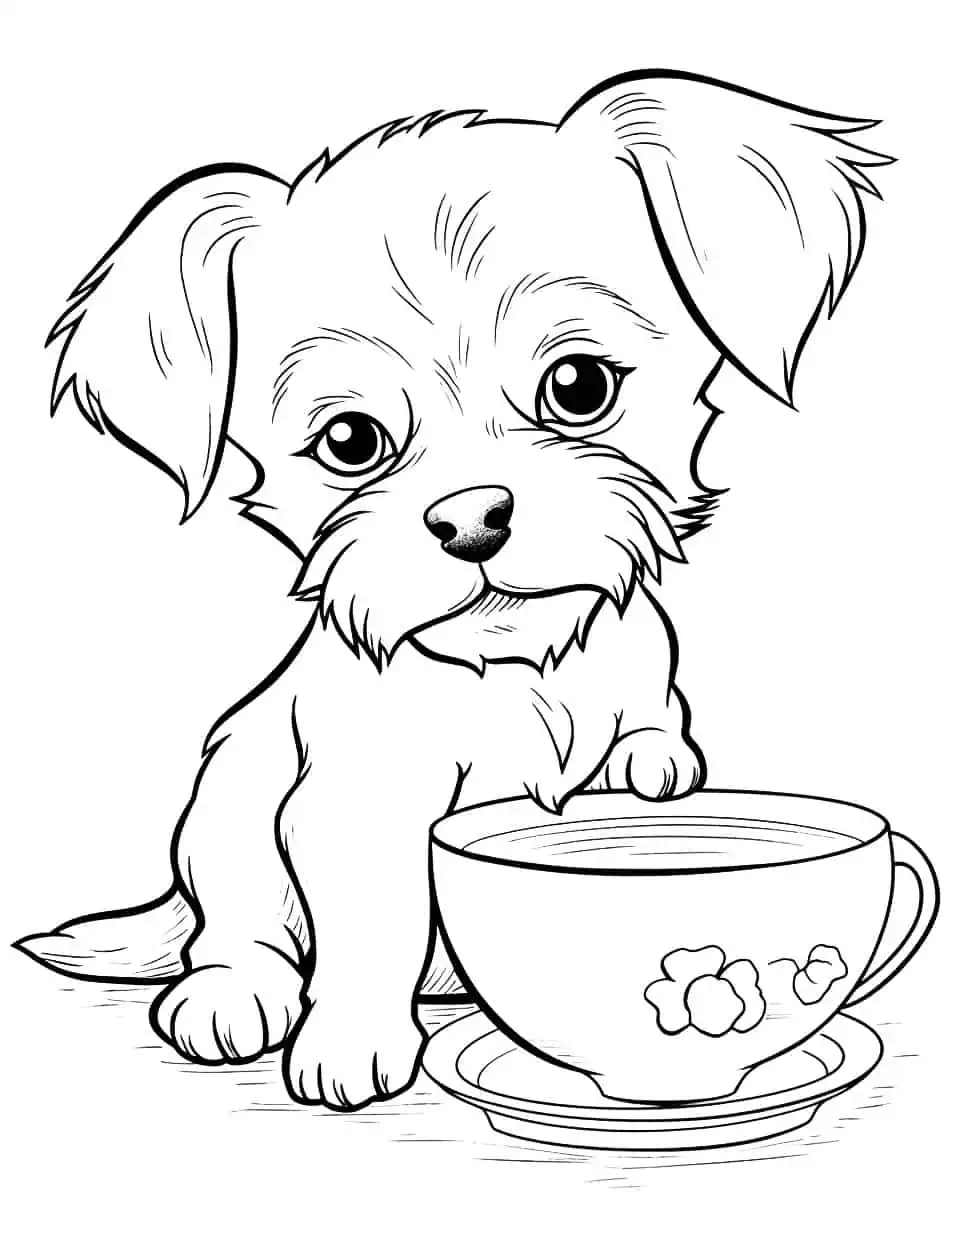 Yorkie and a Teacup Dog Coloring Page - A tiny Yorkie puppy sitting next to a teacup, looking adorable.